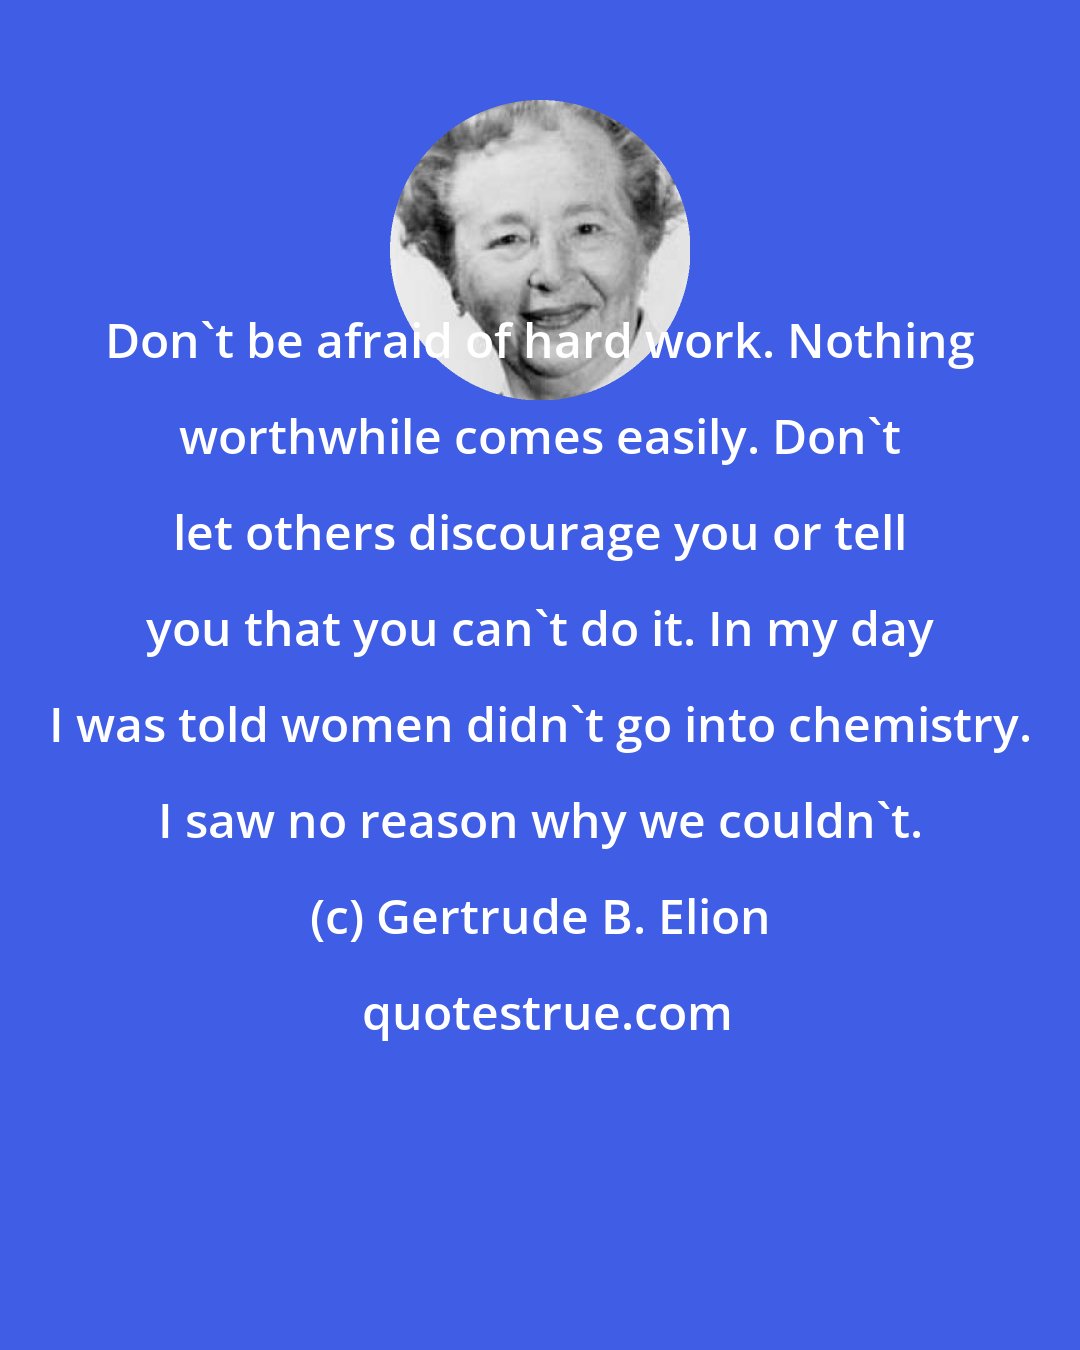 Gertrude B. Elion: Don't be afraid of hard work. Nothing worthwhile comes easily. Don't let others discourage you or tell you that you can't do it. In my day I was told women didn't go into chemistry. I saw no reason why we couldn't.